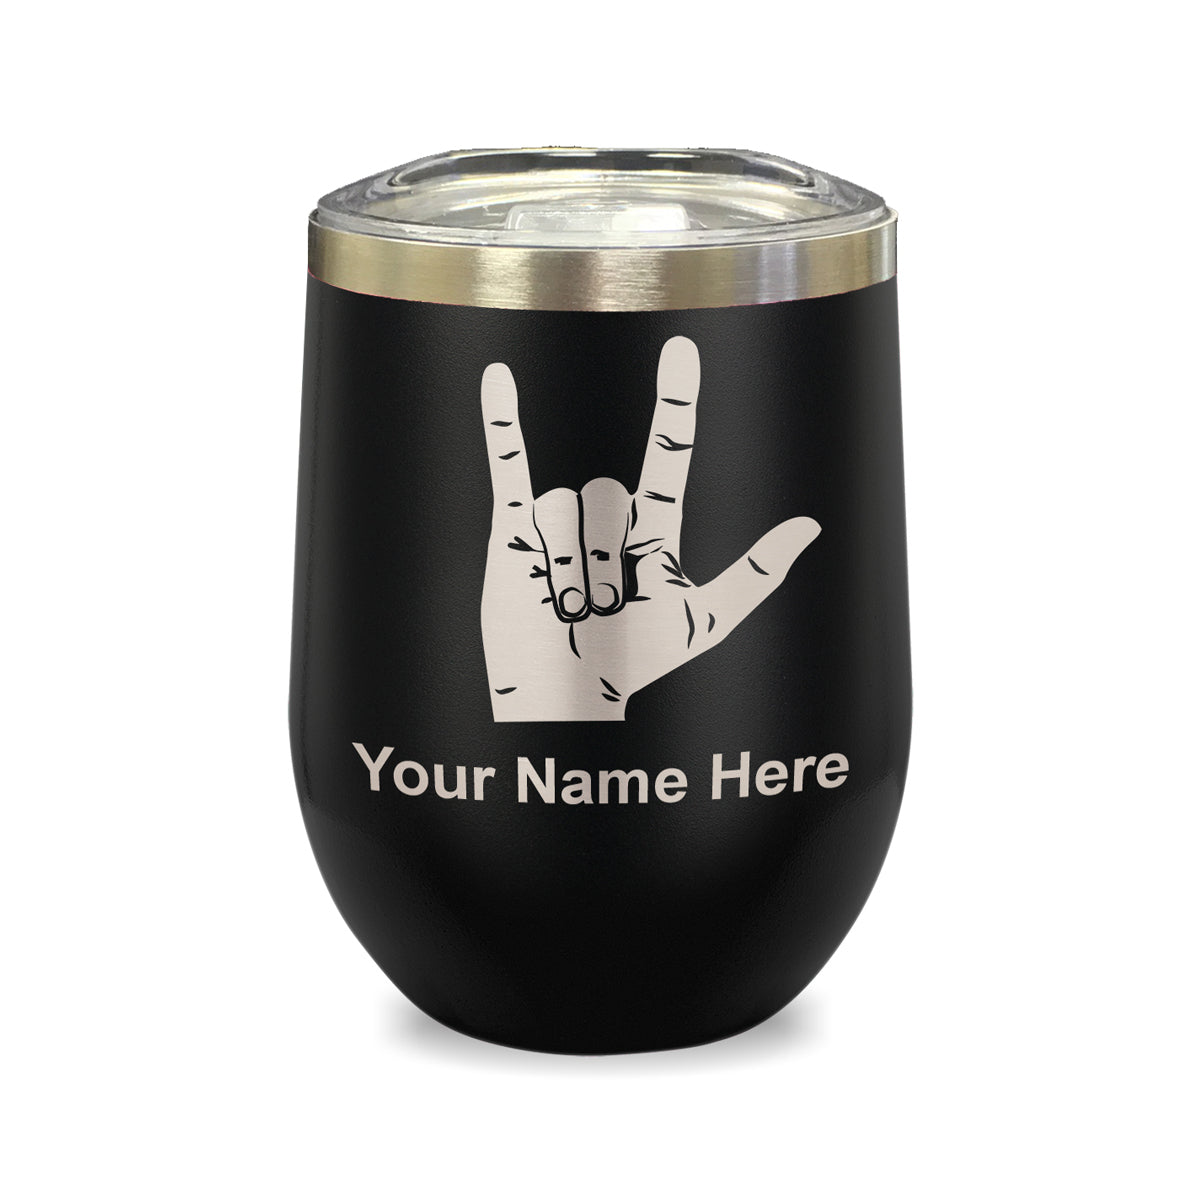 LaserGram Double Wall Stainless Steel Wine Glass, Sign Language I Love You, Personalized Engraving Included